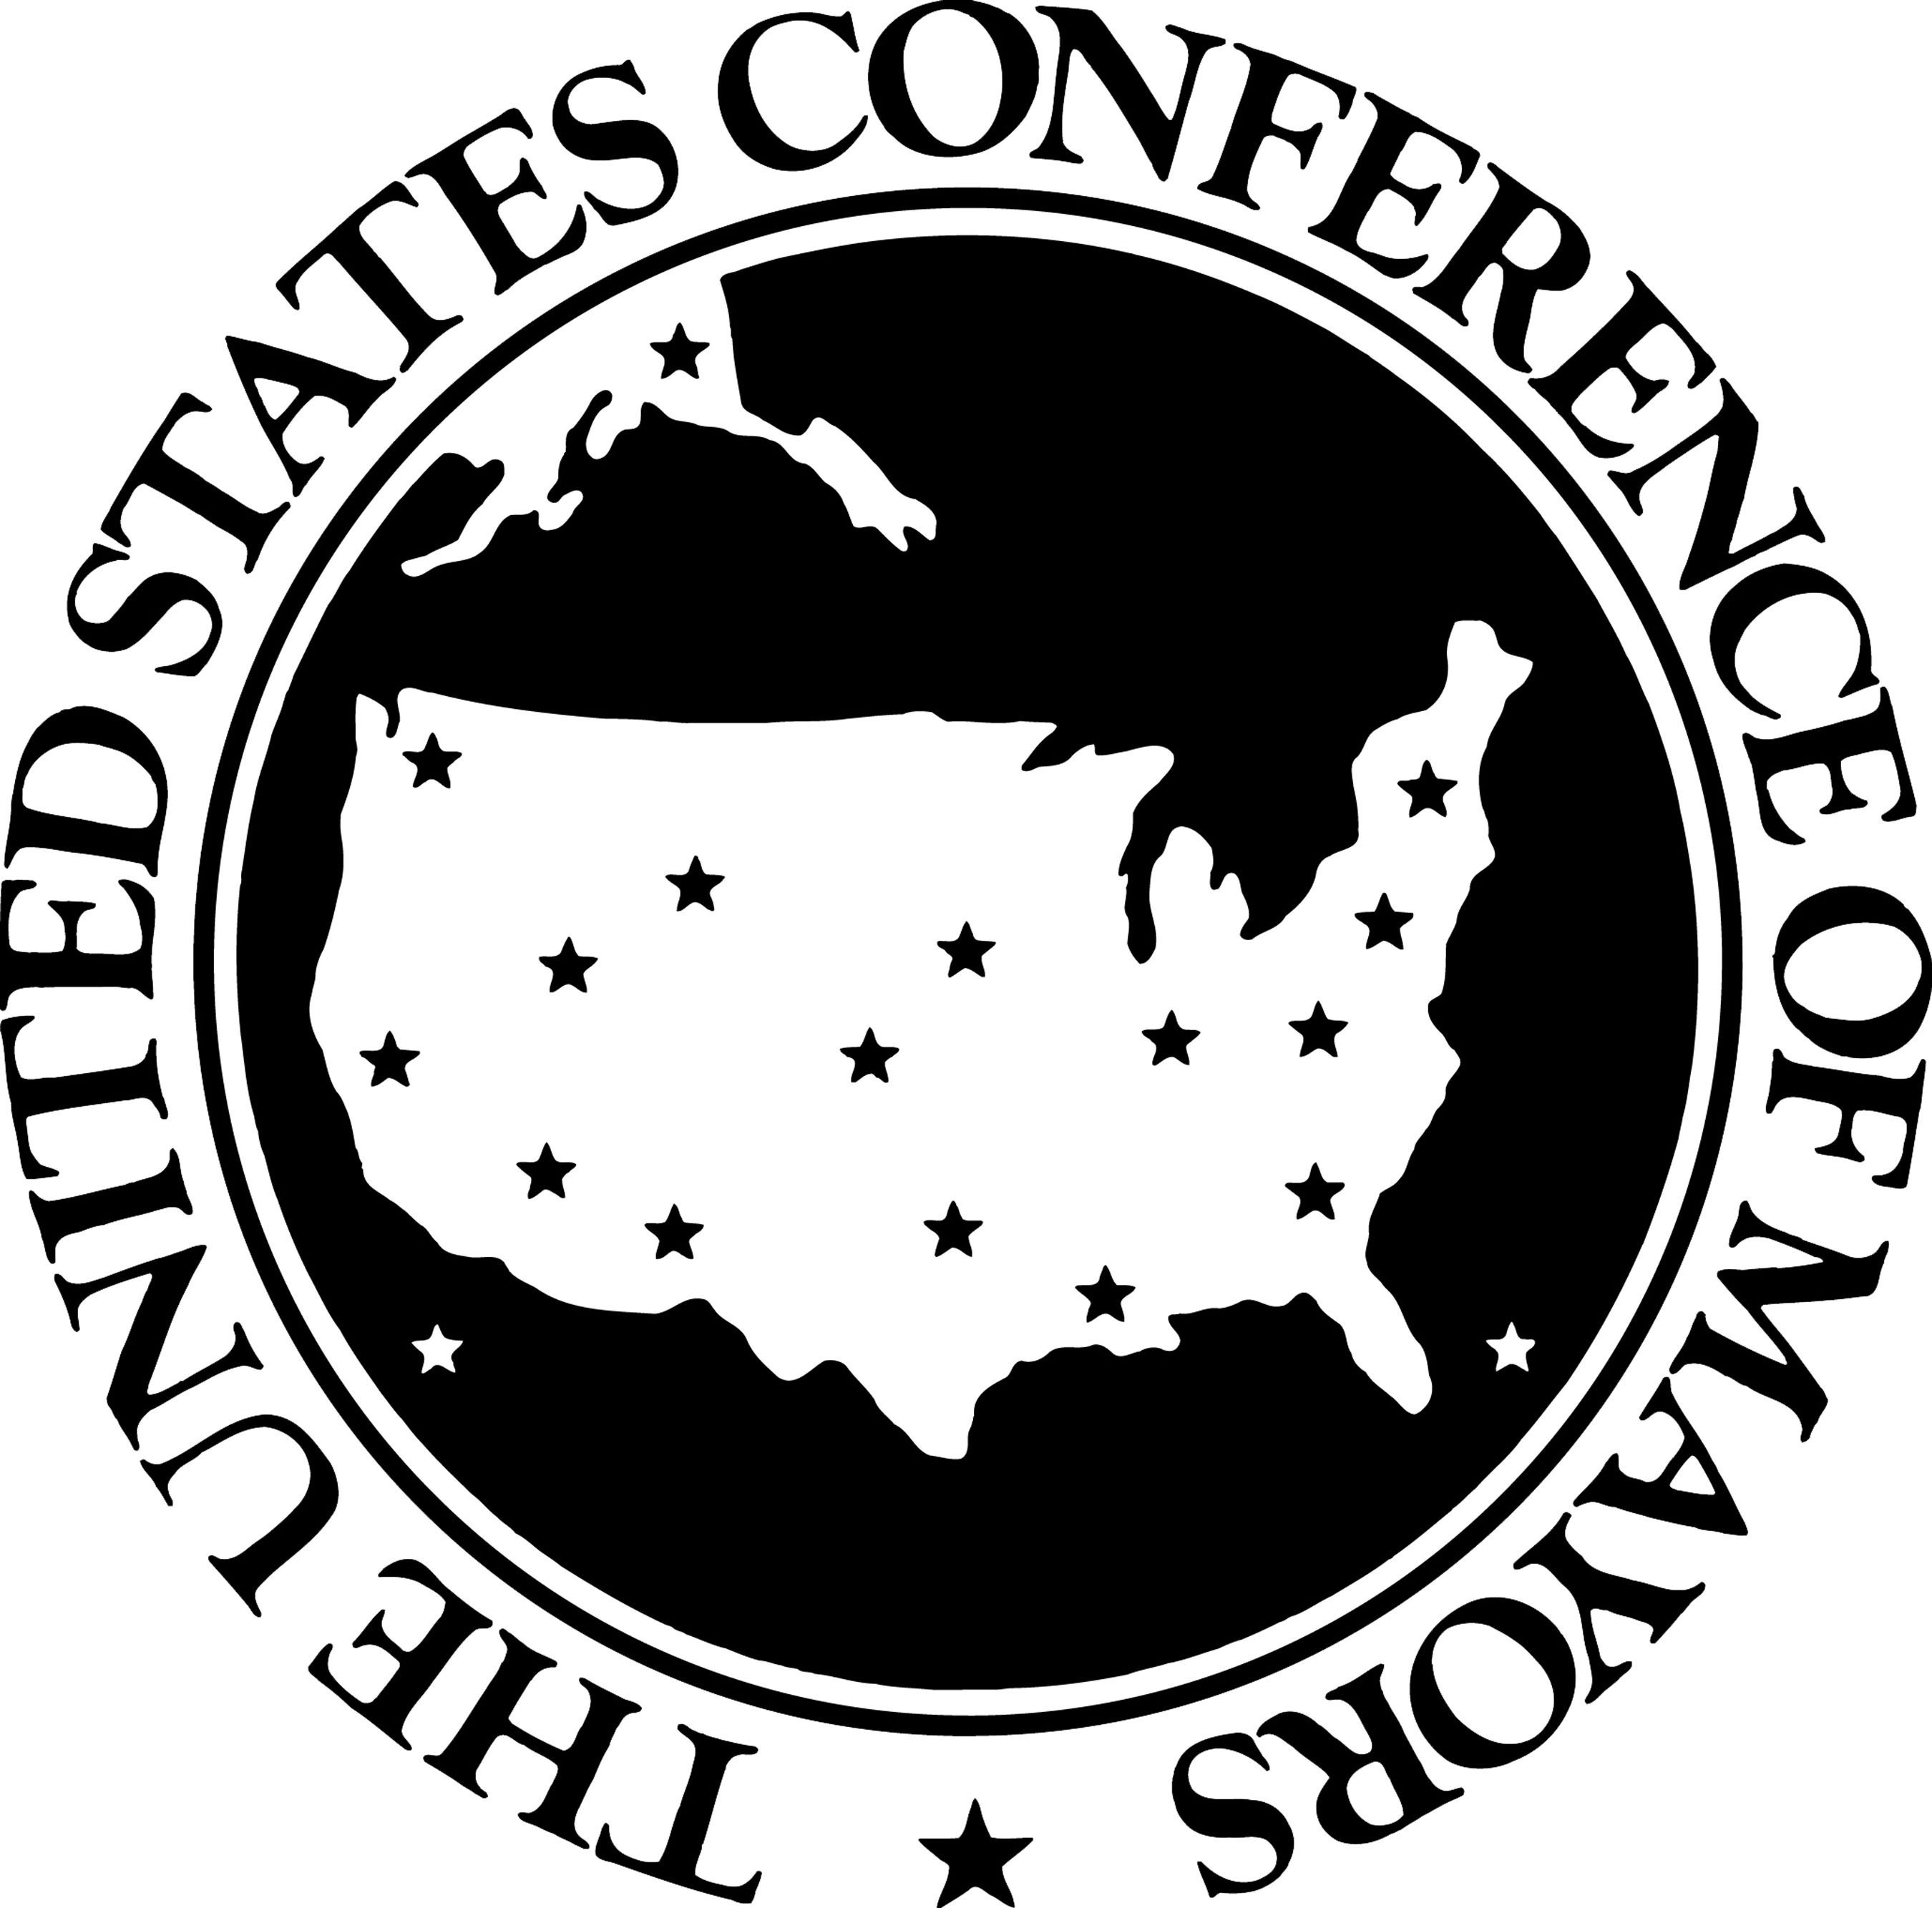 The U.S. Conference of Mayors